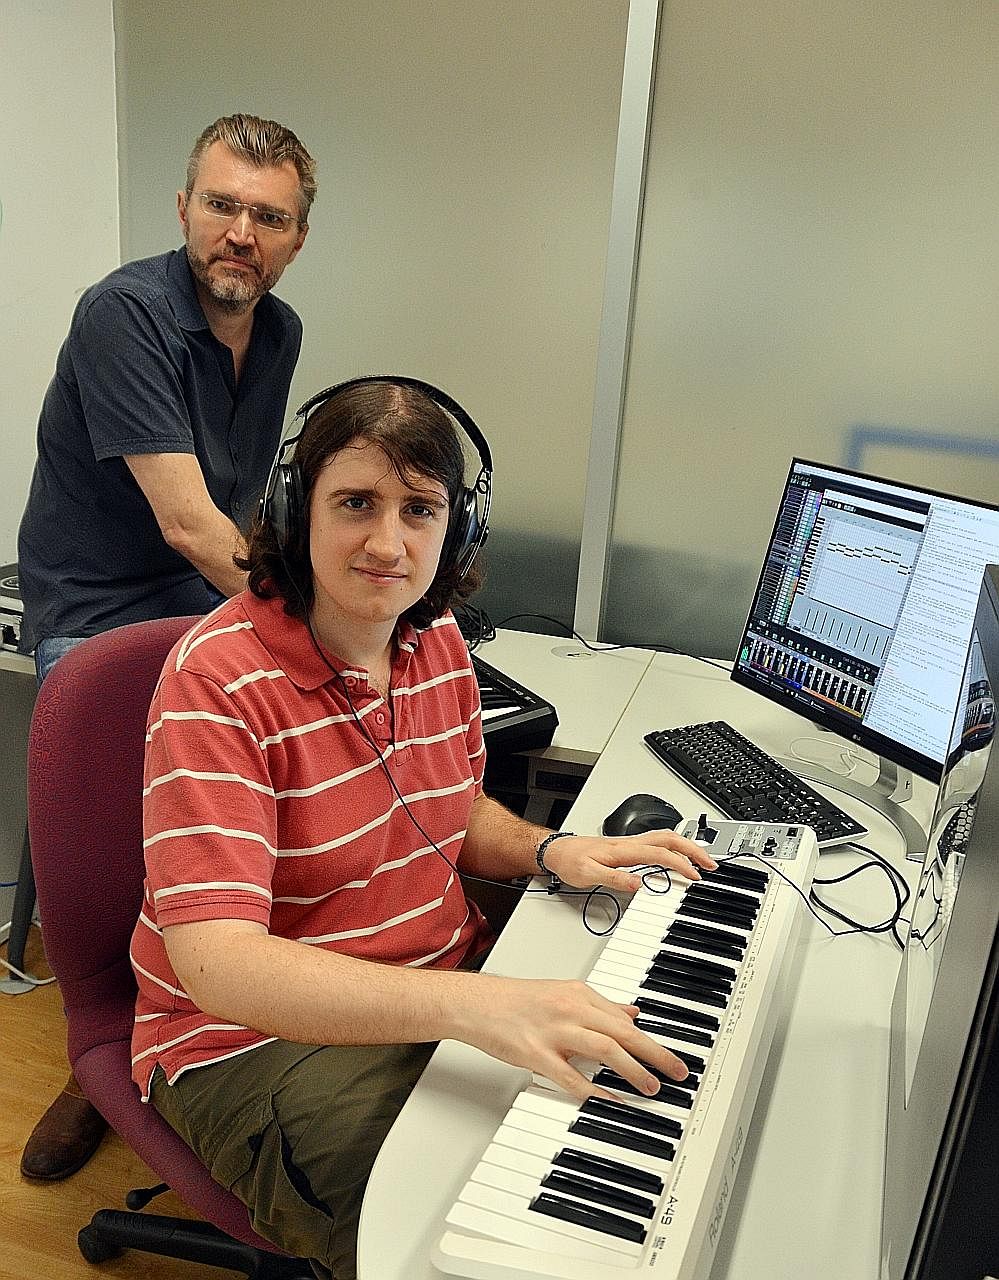 Dr Andrew Garner (in red) and Prof Vlatko Vedral at NUS' Centre for Quantum Technologies with a computer and keyboard set-up that translates quantum effects into musical sounds.